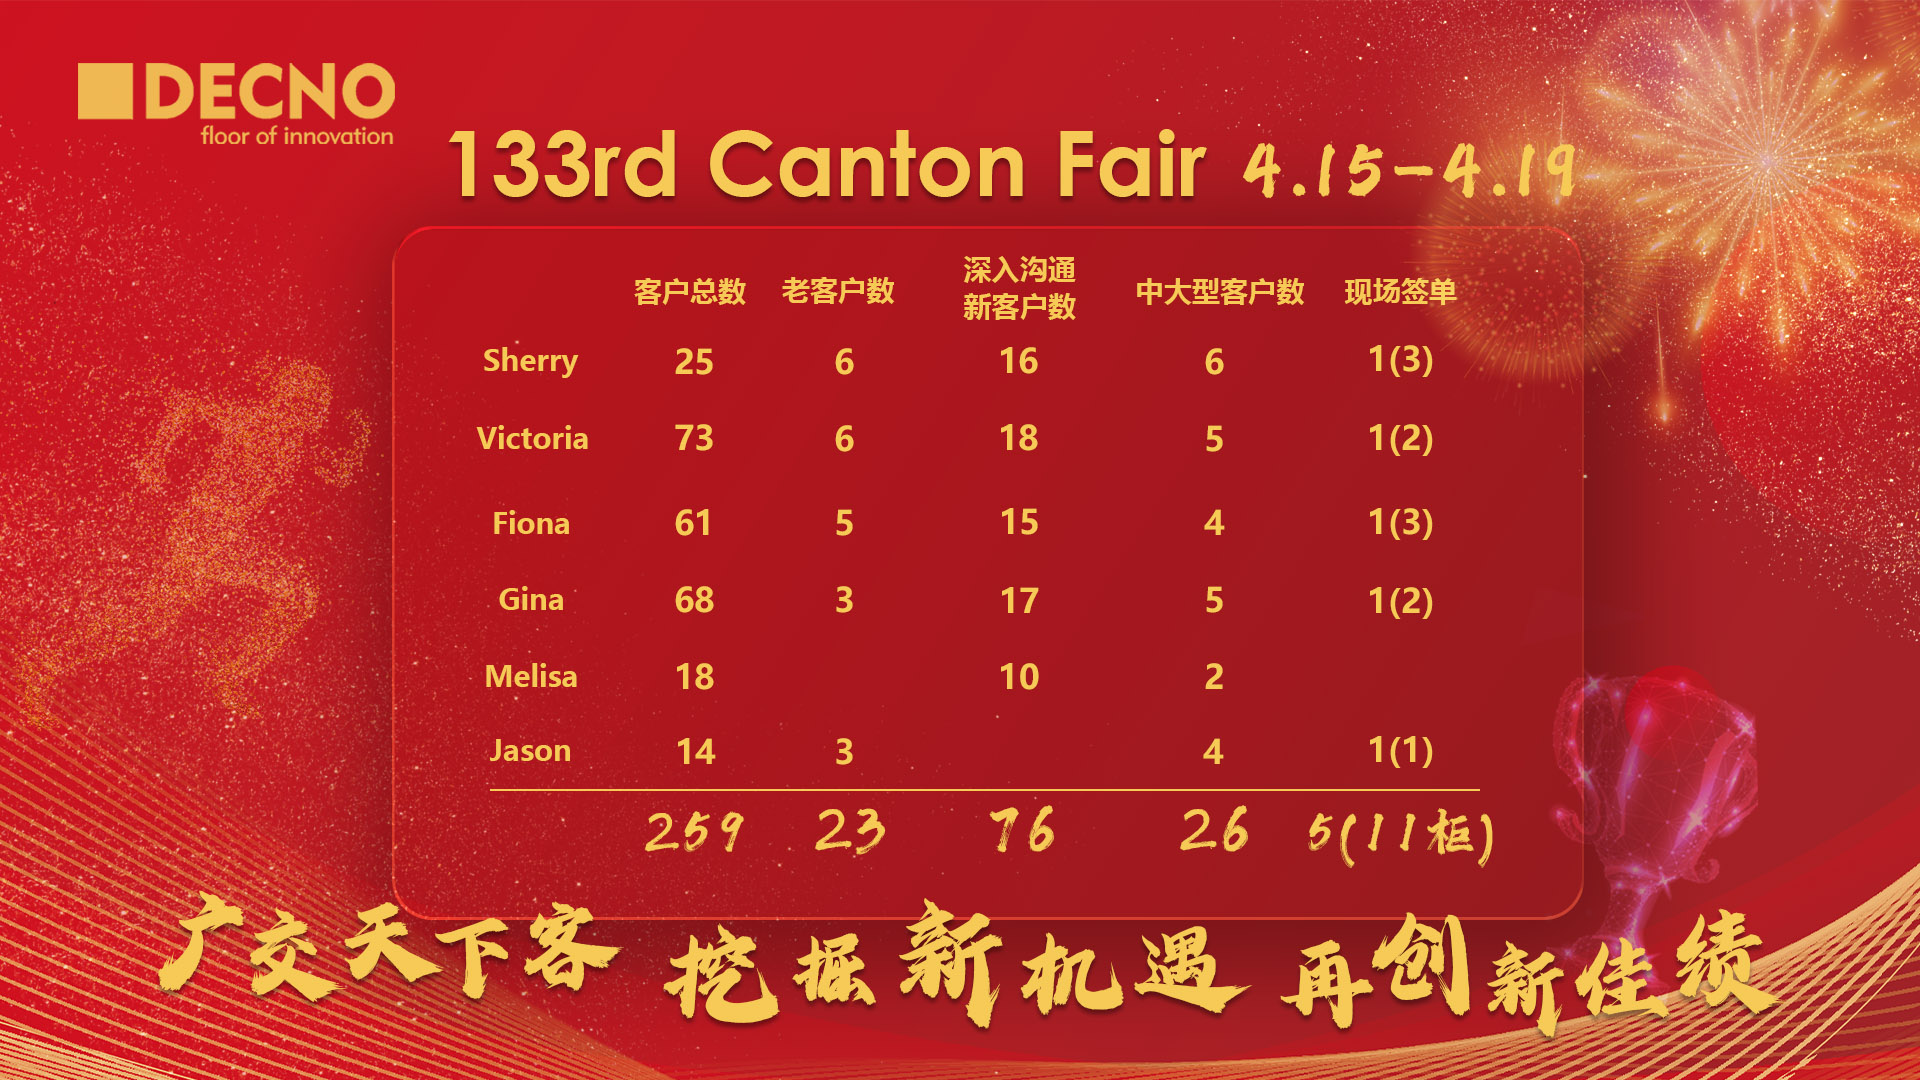 133rd Canton Fair-Complete Victory, Look Beyond